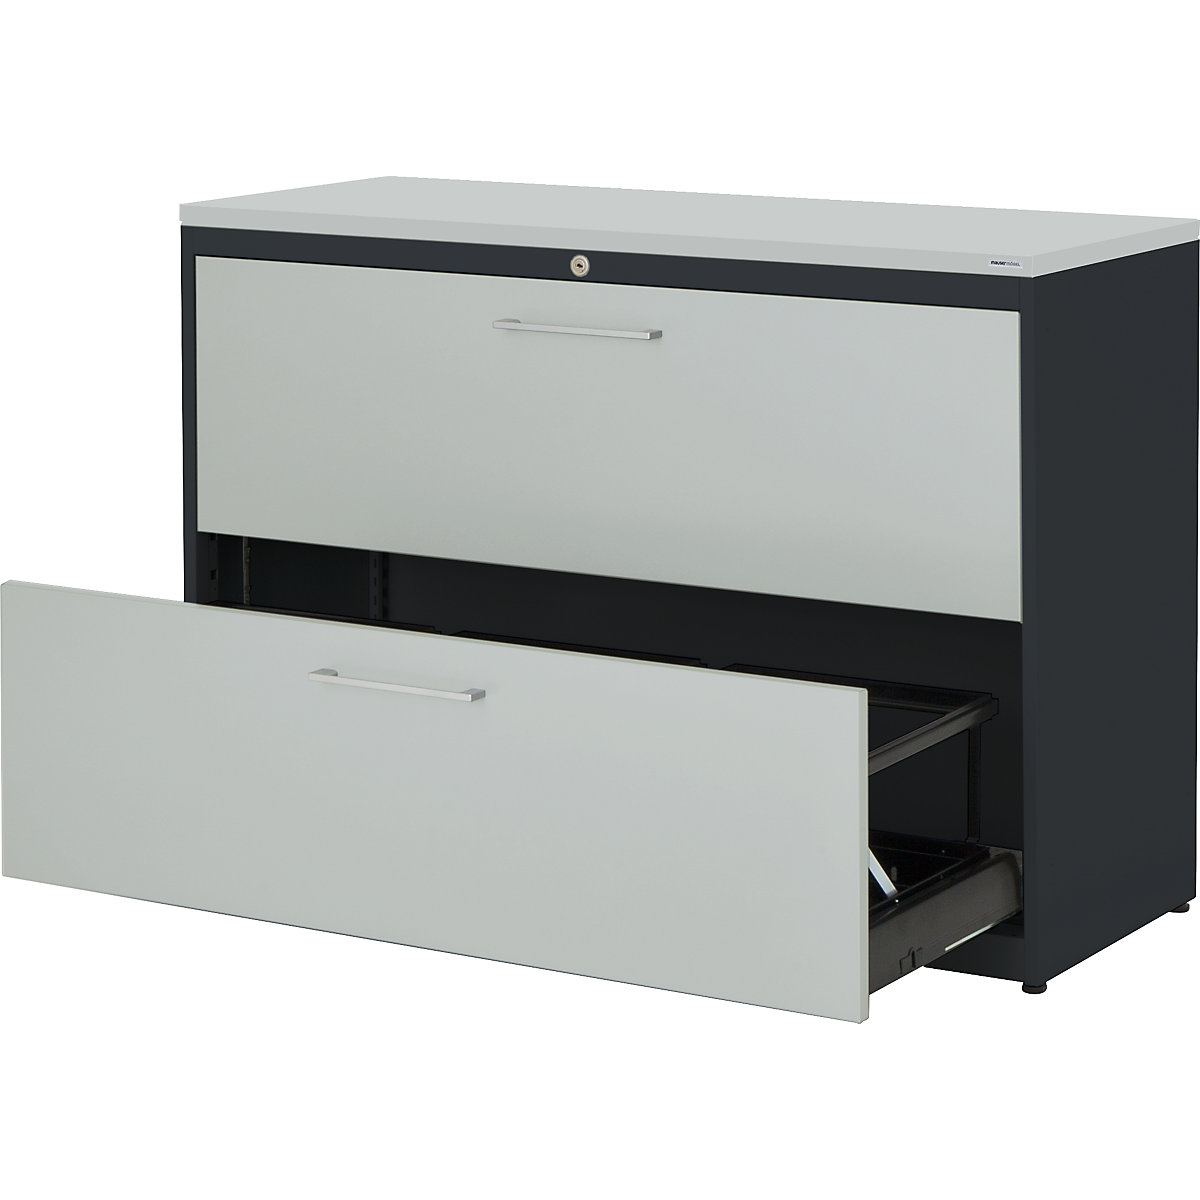 Suspension filing cabinet – mauser, plastic panel, 2 drawers, 3 tracks, with dampers, charcoal / light grey / light grey-5